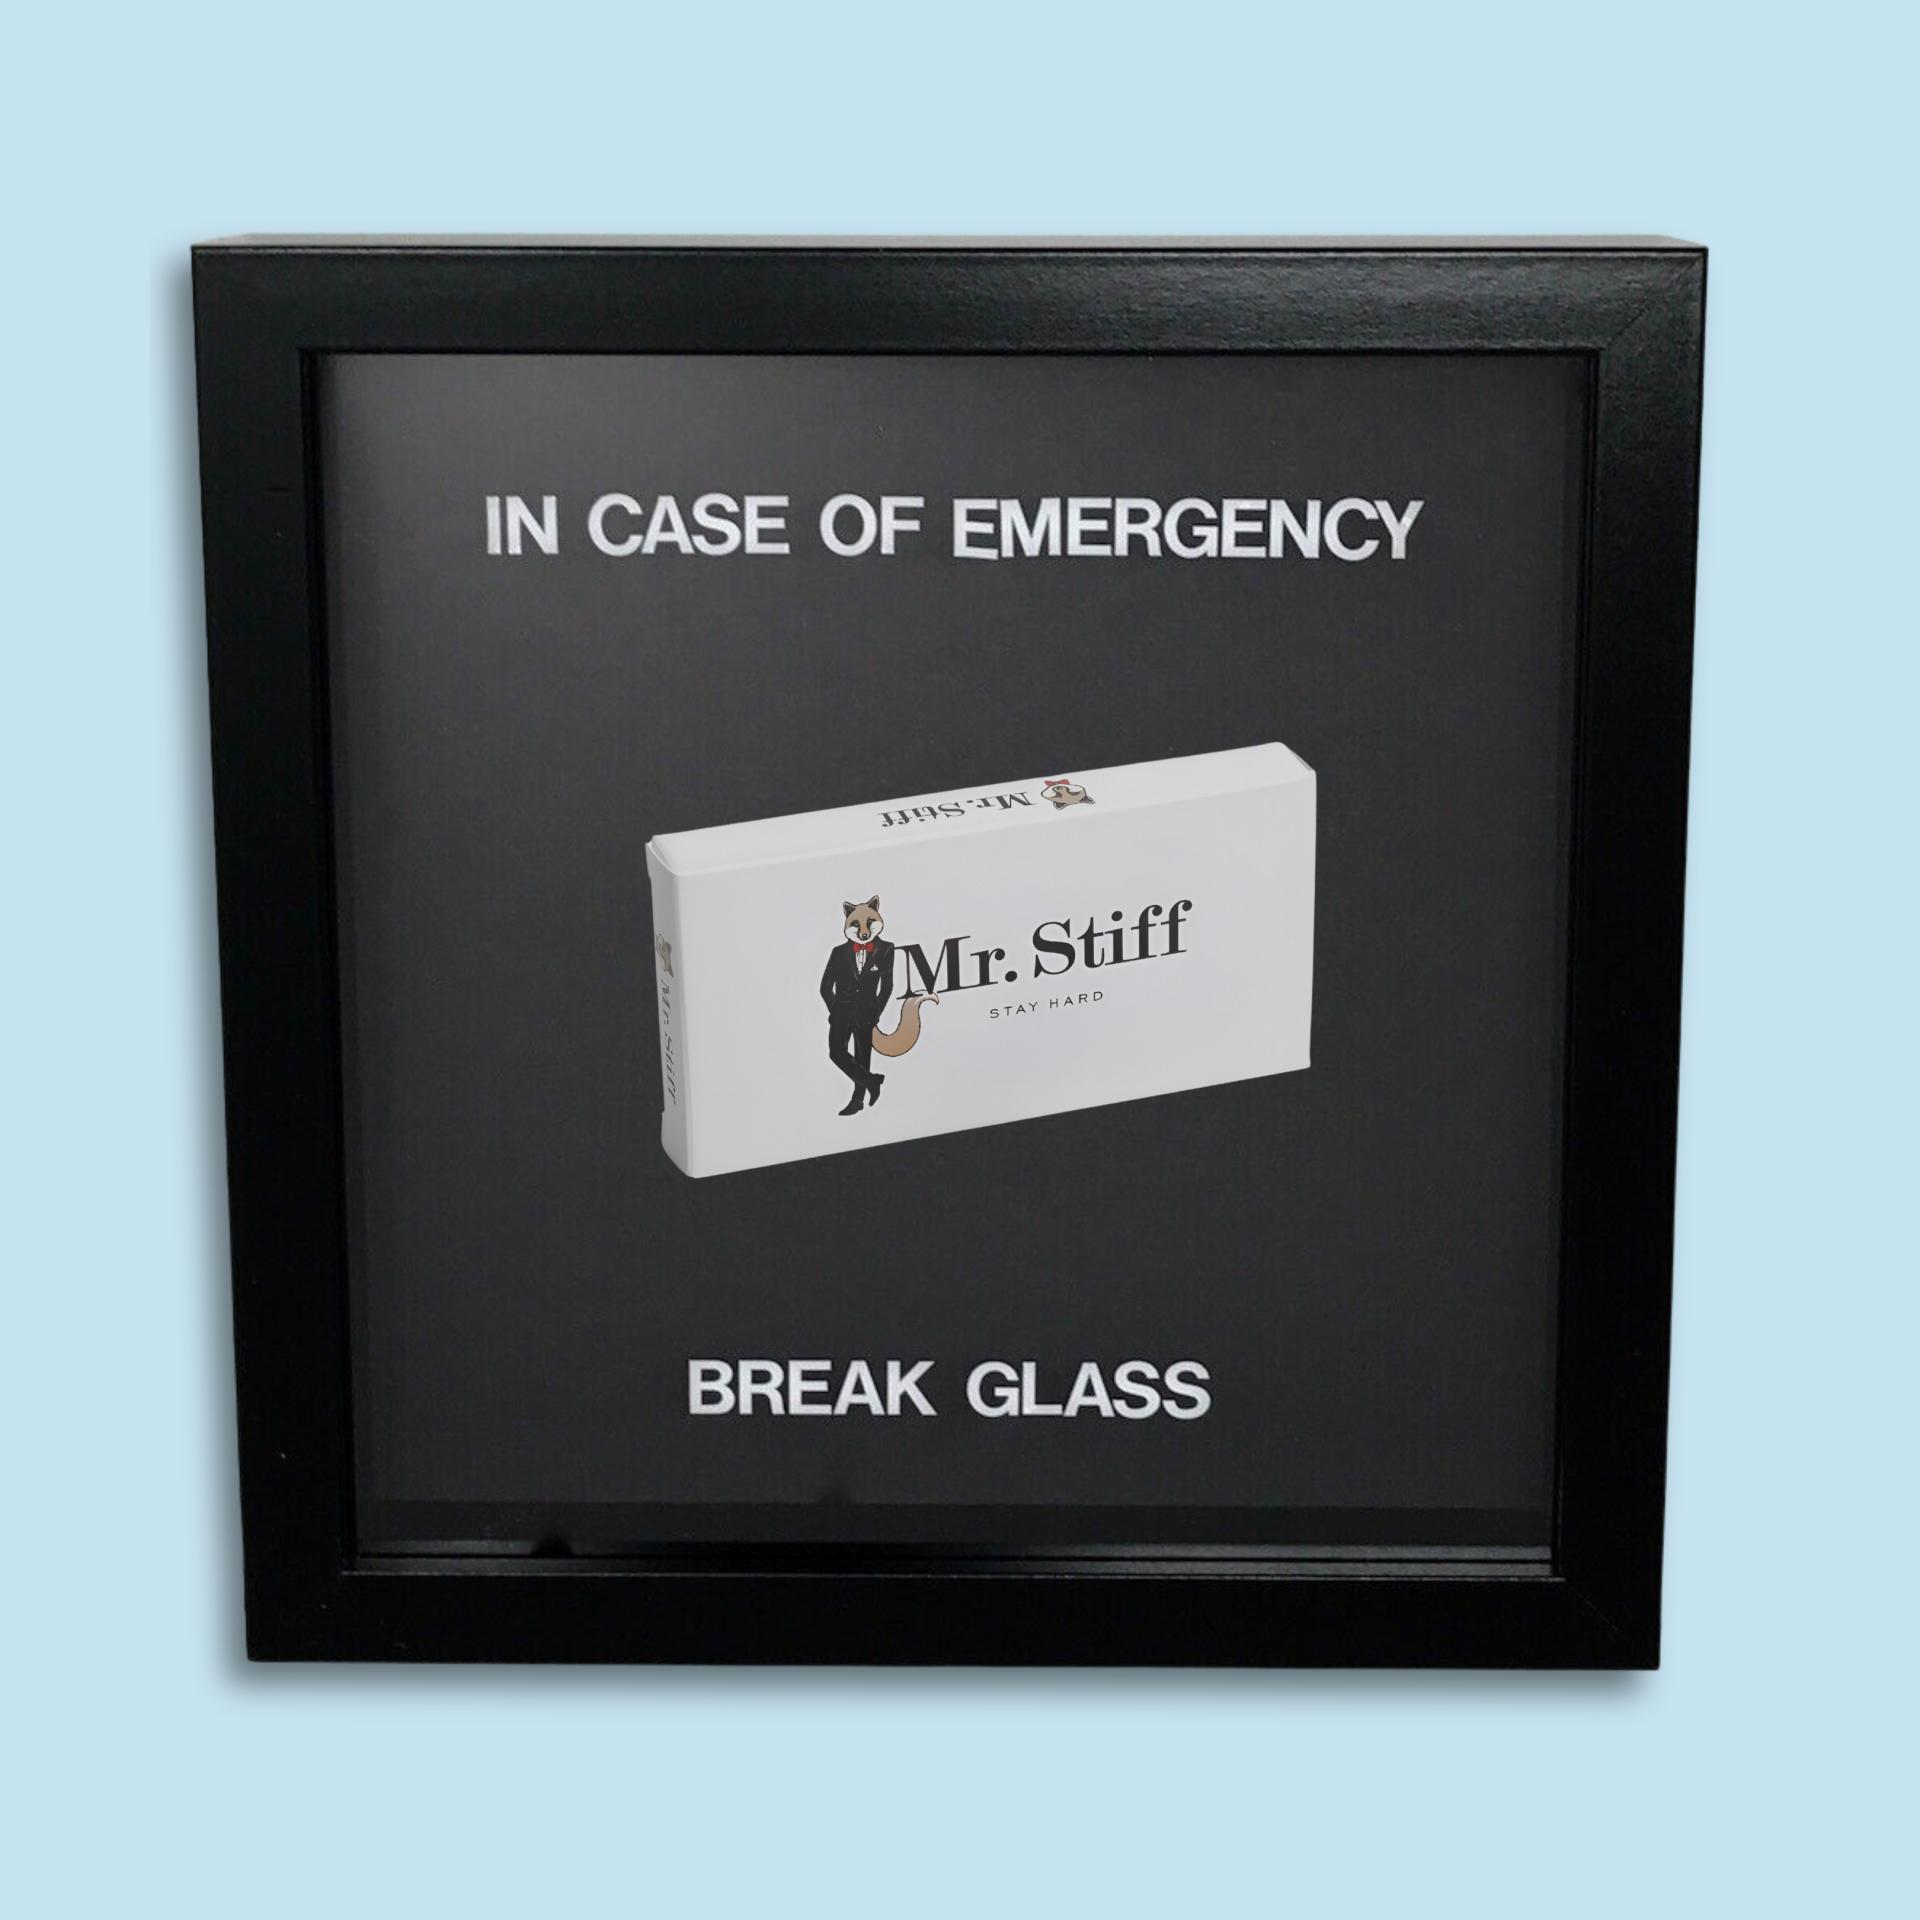 a composite image of a Mr Stiff package in an emergency break glass box